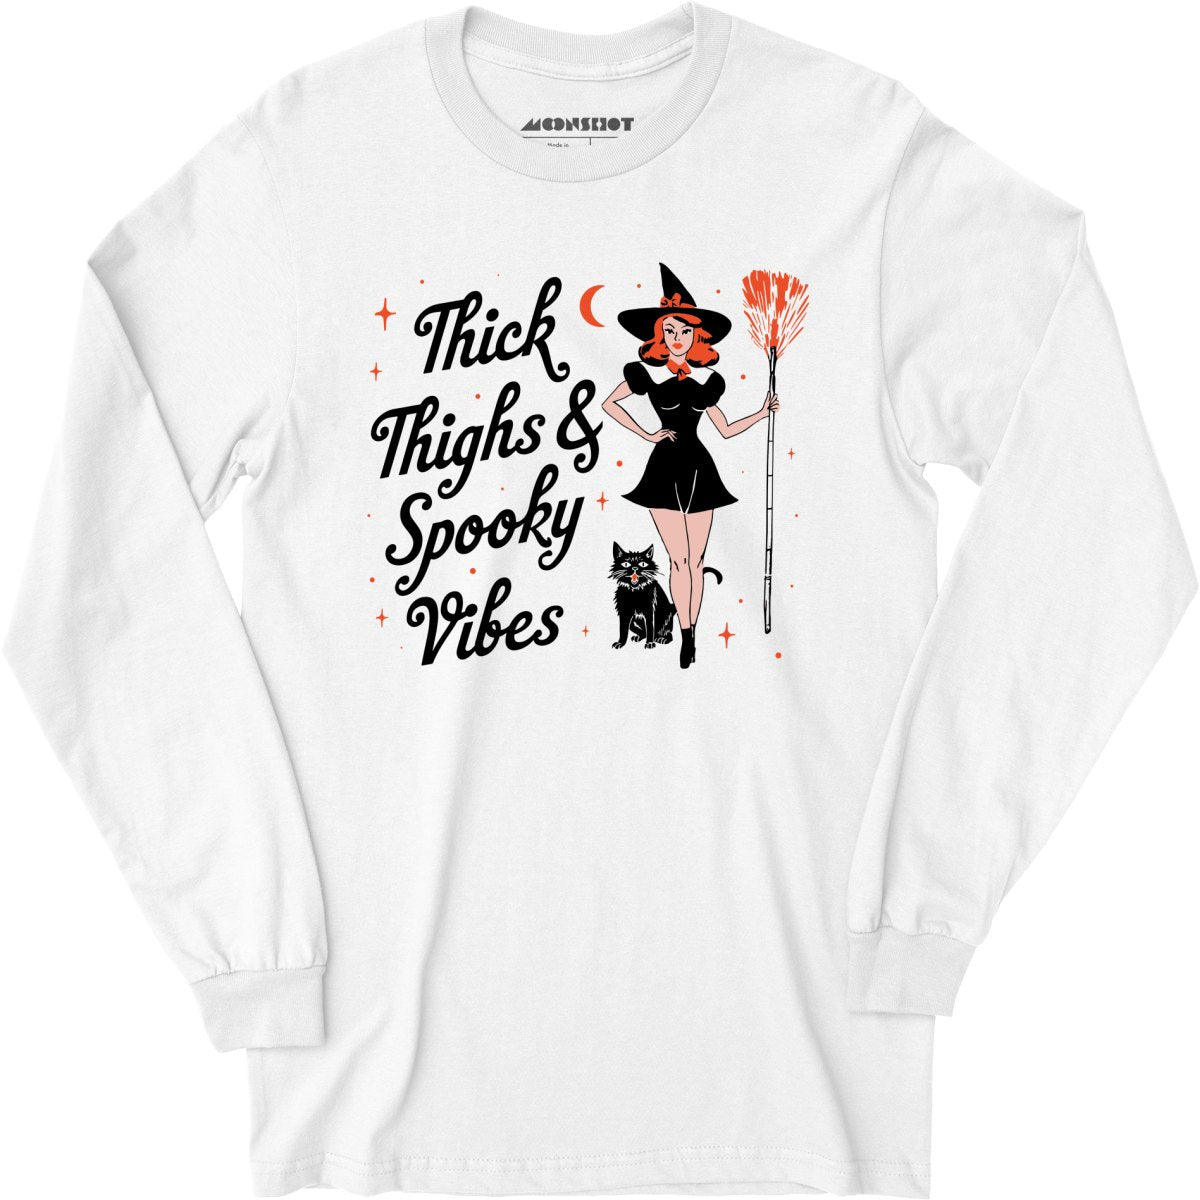 Thick Thighs and Spooky Vibes - Long Sleeve T-Shirt